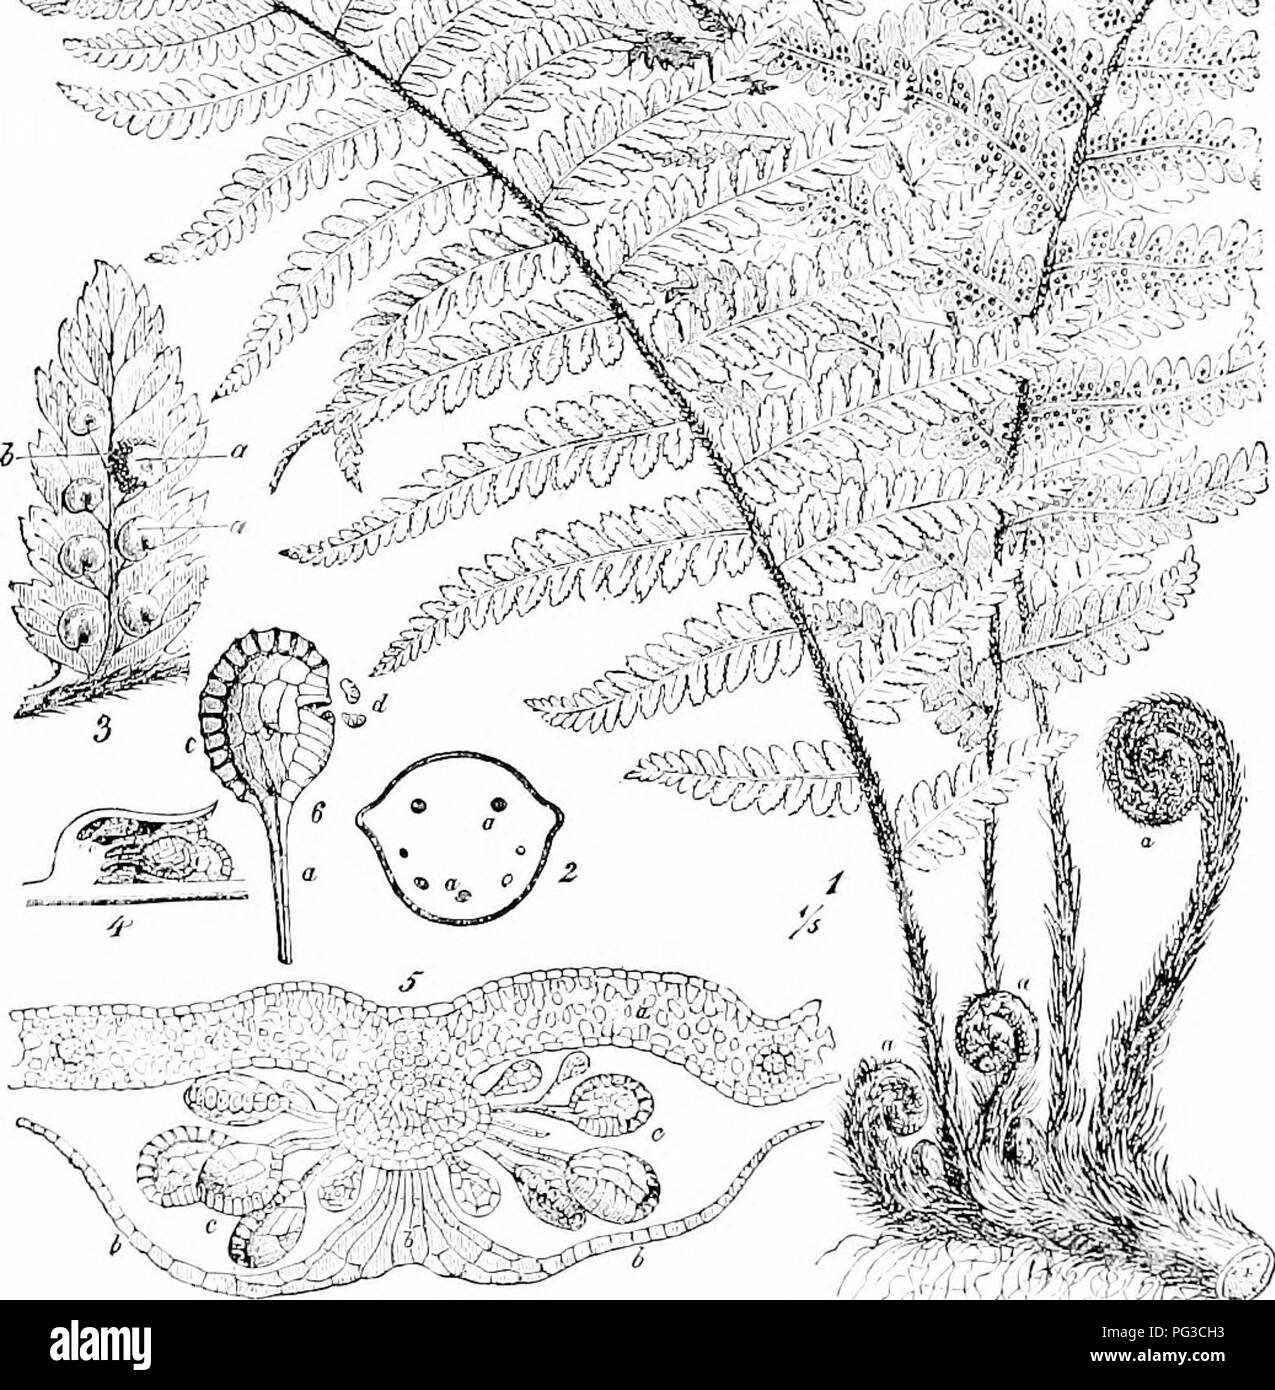 . Plant studies; an elementary botany. Botany. S- 1a f l^^^''k IW'^^^  '7. Km. â¢â I'M). A fern {Anji'nr/inri), phowin^ three lame branchiriLr leaves coniiiiL^ from ;i horizontal Biil)terranean stem (rootPtoek); ynimi: lfacs are also shown, whirh show circiimte vernation. The stem, j'onng leavi's, ami petioles of Ilir lar^ie leaves are tliiekly rovernl with protretinir hairs. Tlir strin L'ivrs rJM' lo nnmcniiis small ro(]ts frmn its lower sitrfaee. The le 'in-c markr.l ,; re|)rc-.rnl^ tlir iimhT sur- face of a [MU-tion of tlie leaf, showing s.^ven snri with sli jel.|.lil&lt;e iiiilii^i;i:  Stock Photo